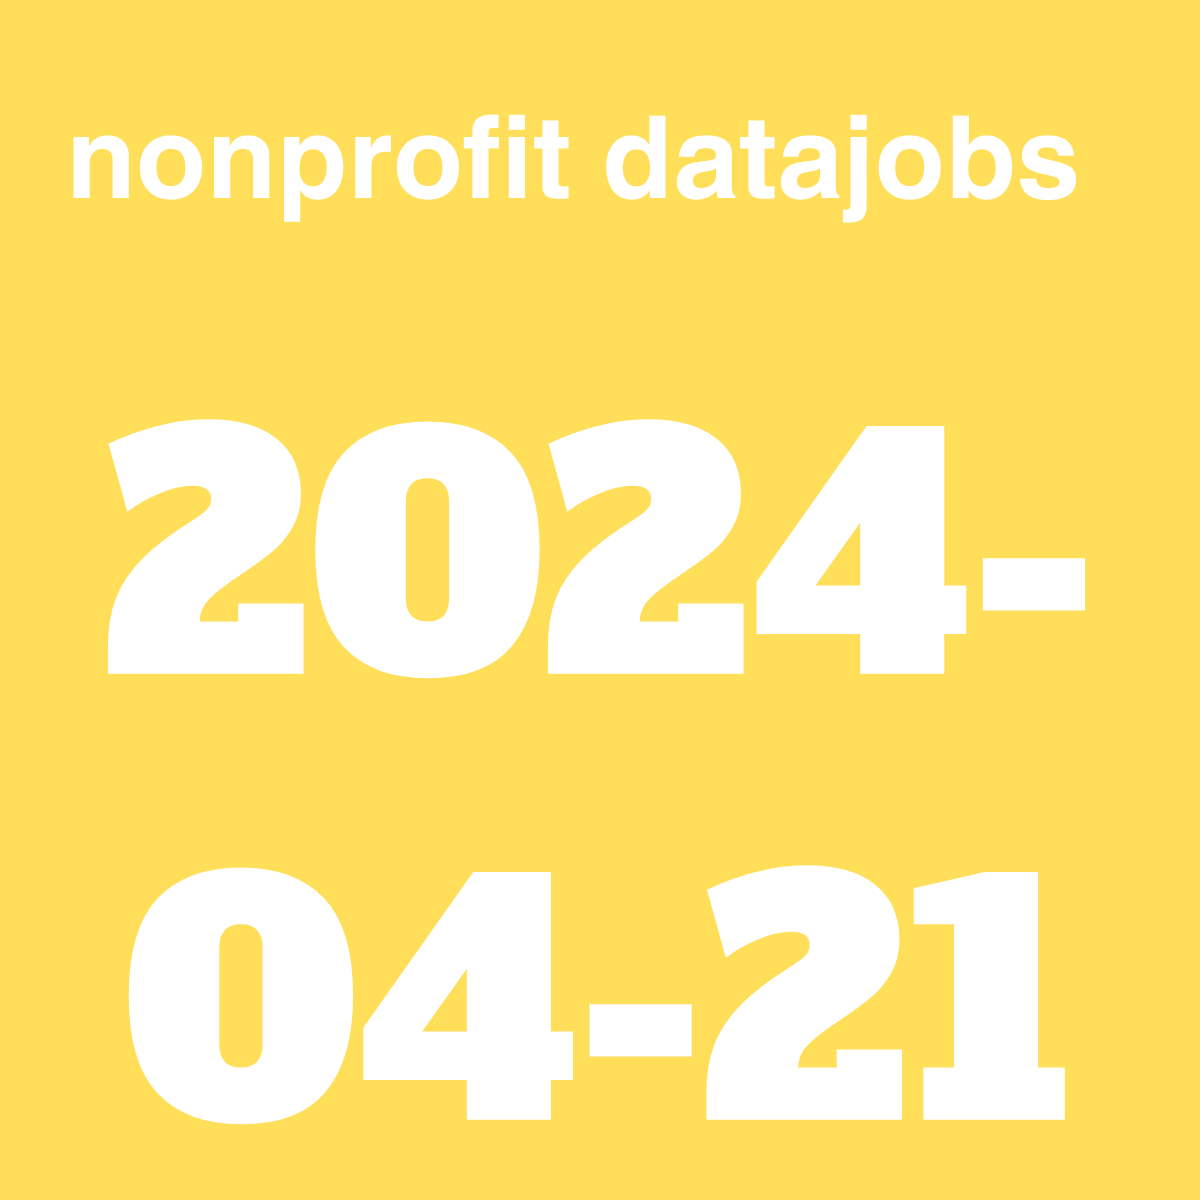 datajobs-2024-04-21.png